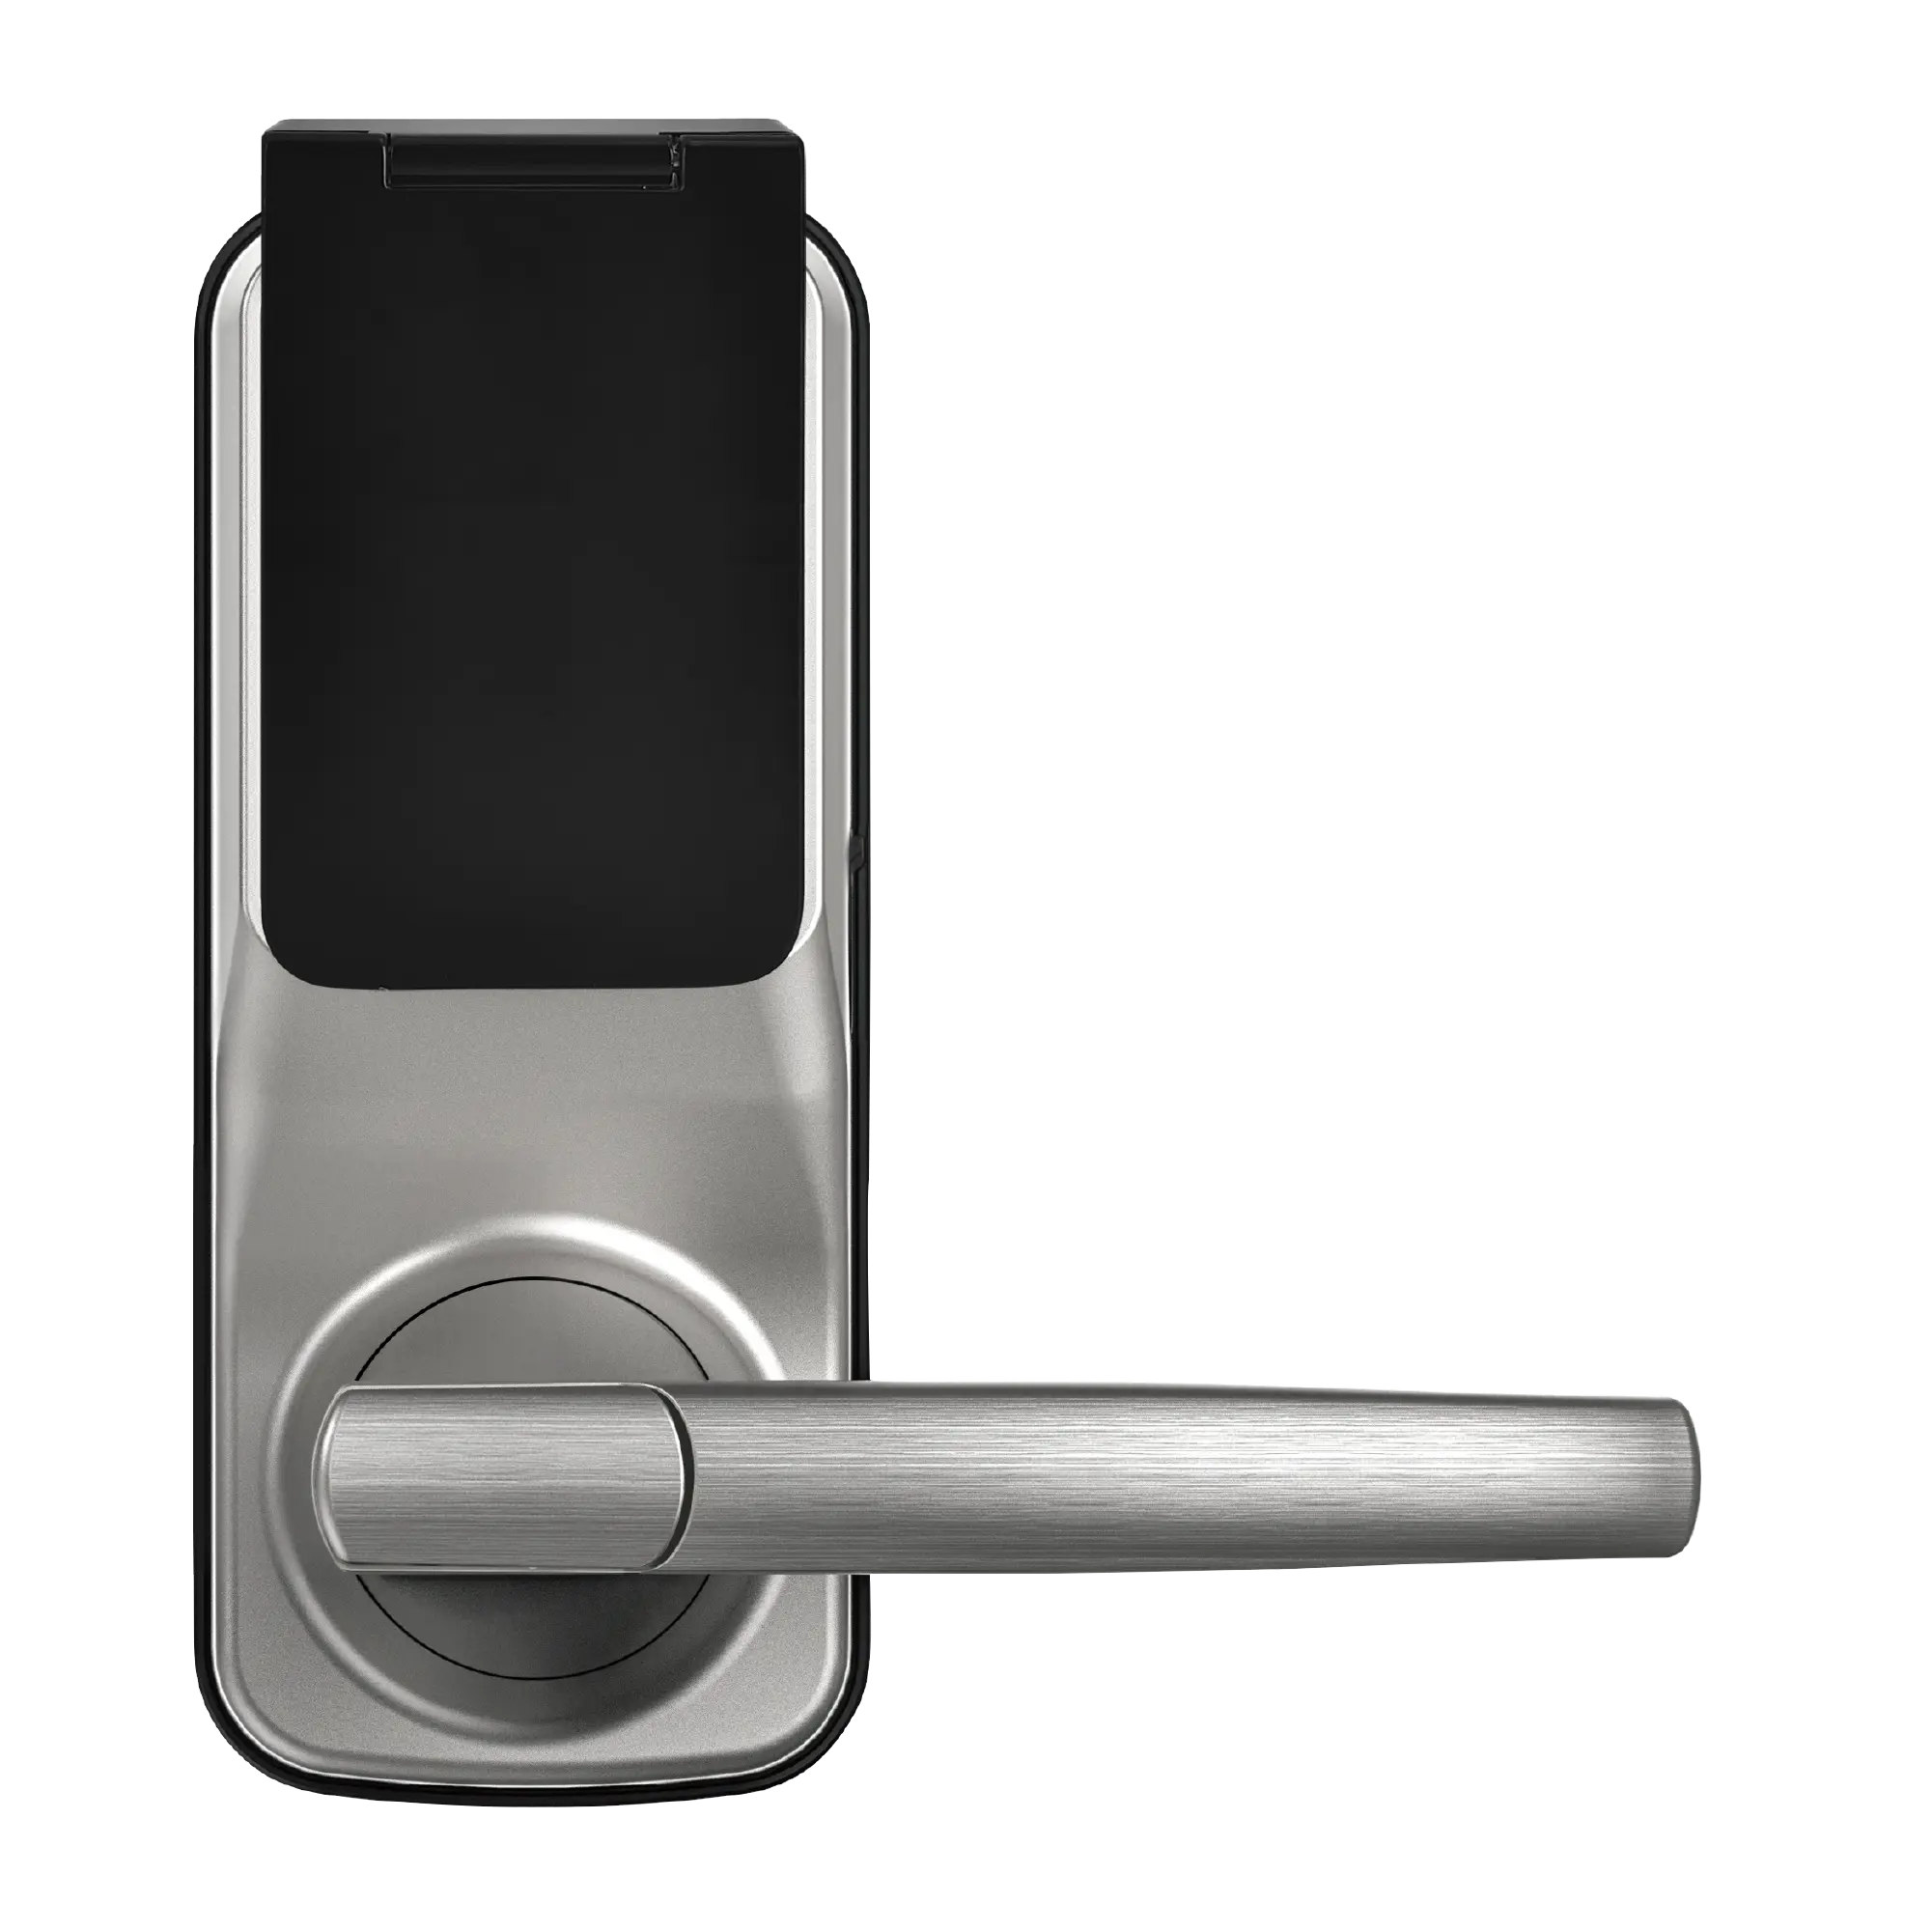 Touchscreen Cover For Lockly Smart Lock